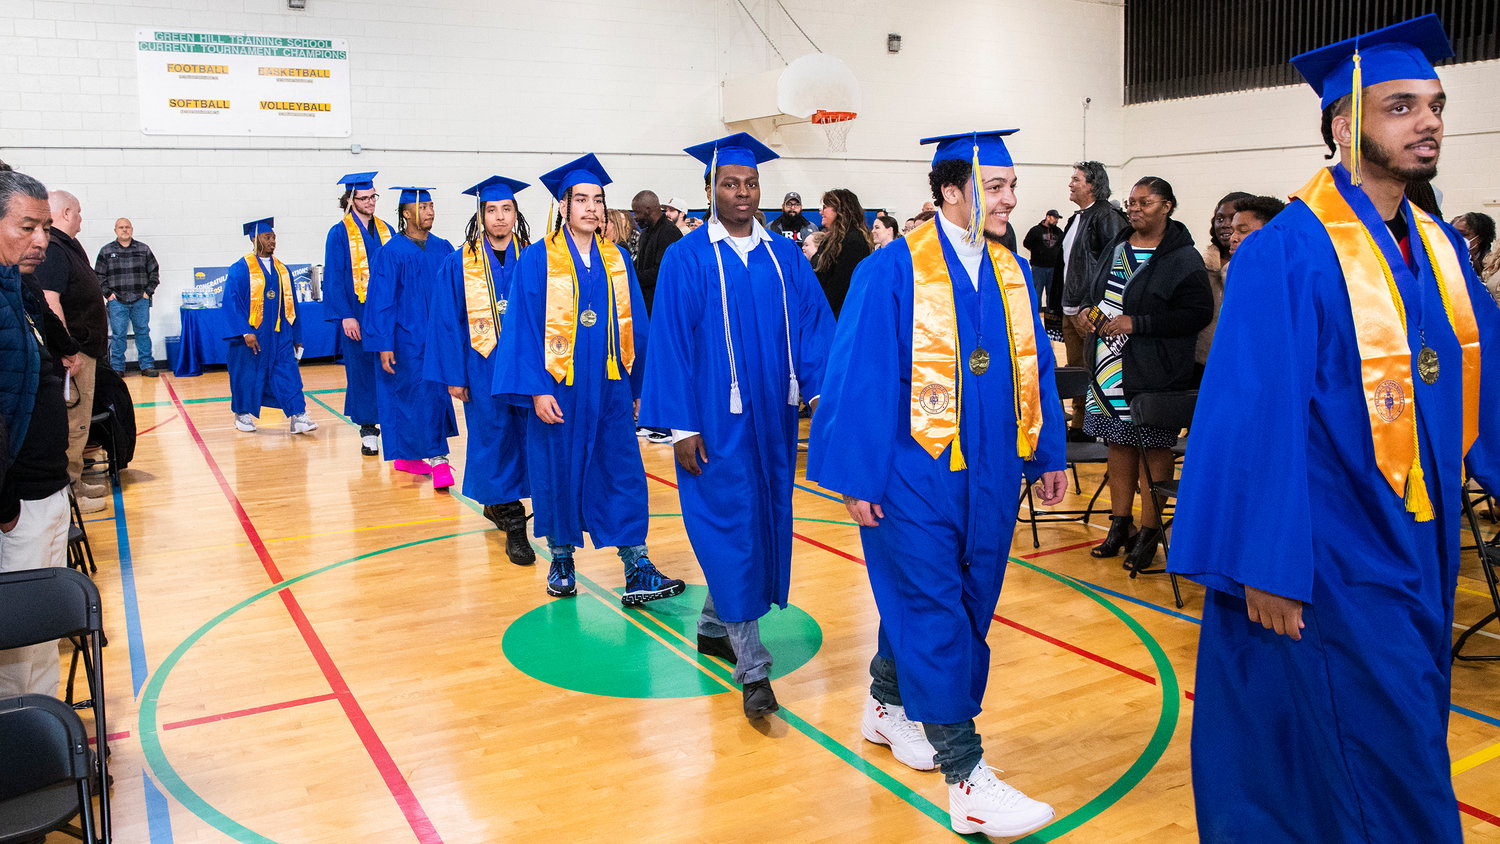 Centralia College graduates smile and walk while sporting caps and gowns during a ceremony held at the Green Hill School on Wednesday in Chehalis.